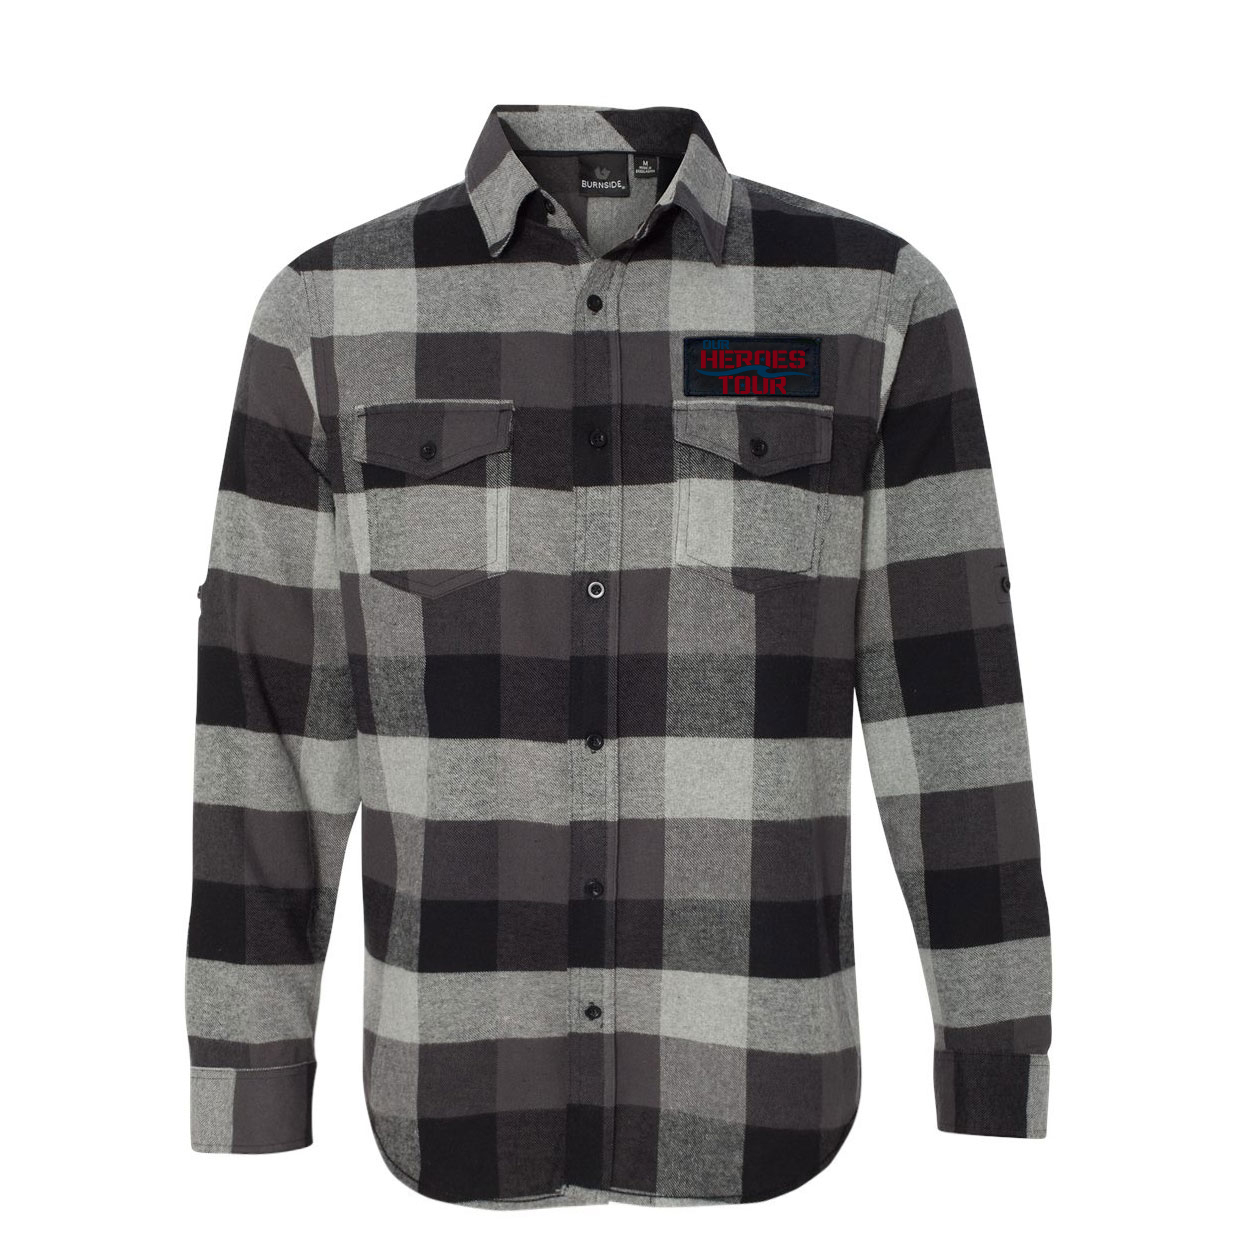 Our Heroes Tour Classic Unisex Long Sleeve Woven Patch Flannel Shirt Black/Gray (White Logo)